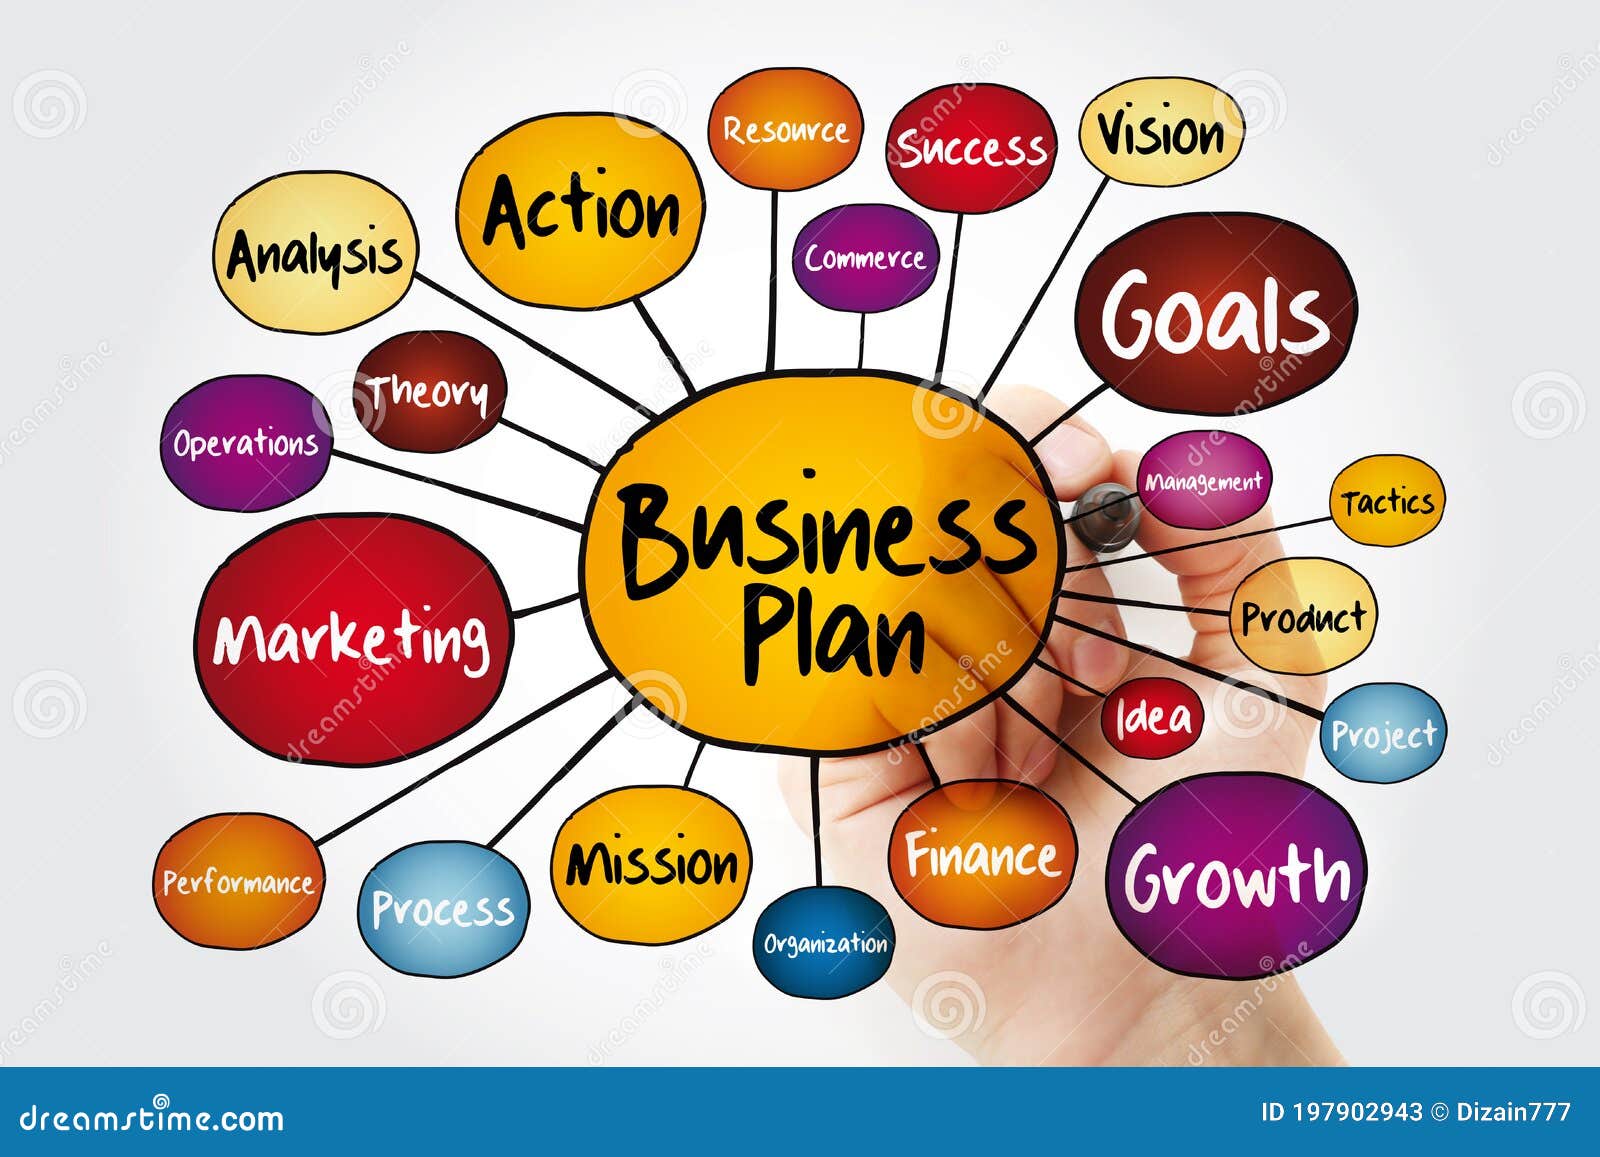 the concept of business plan